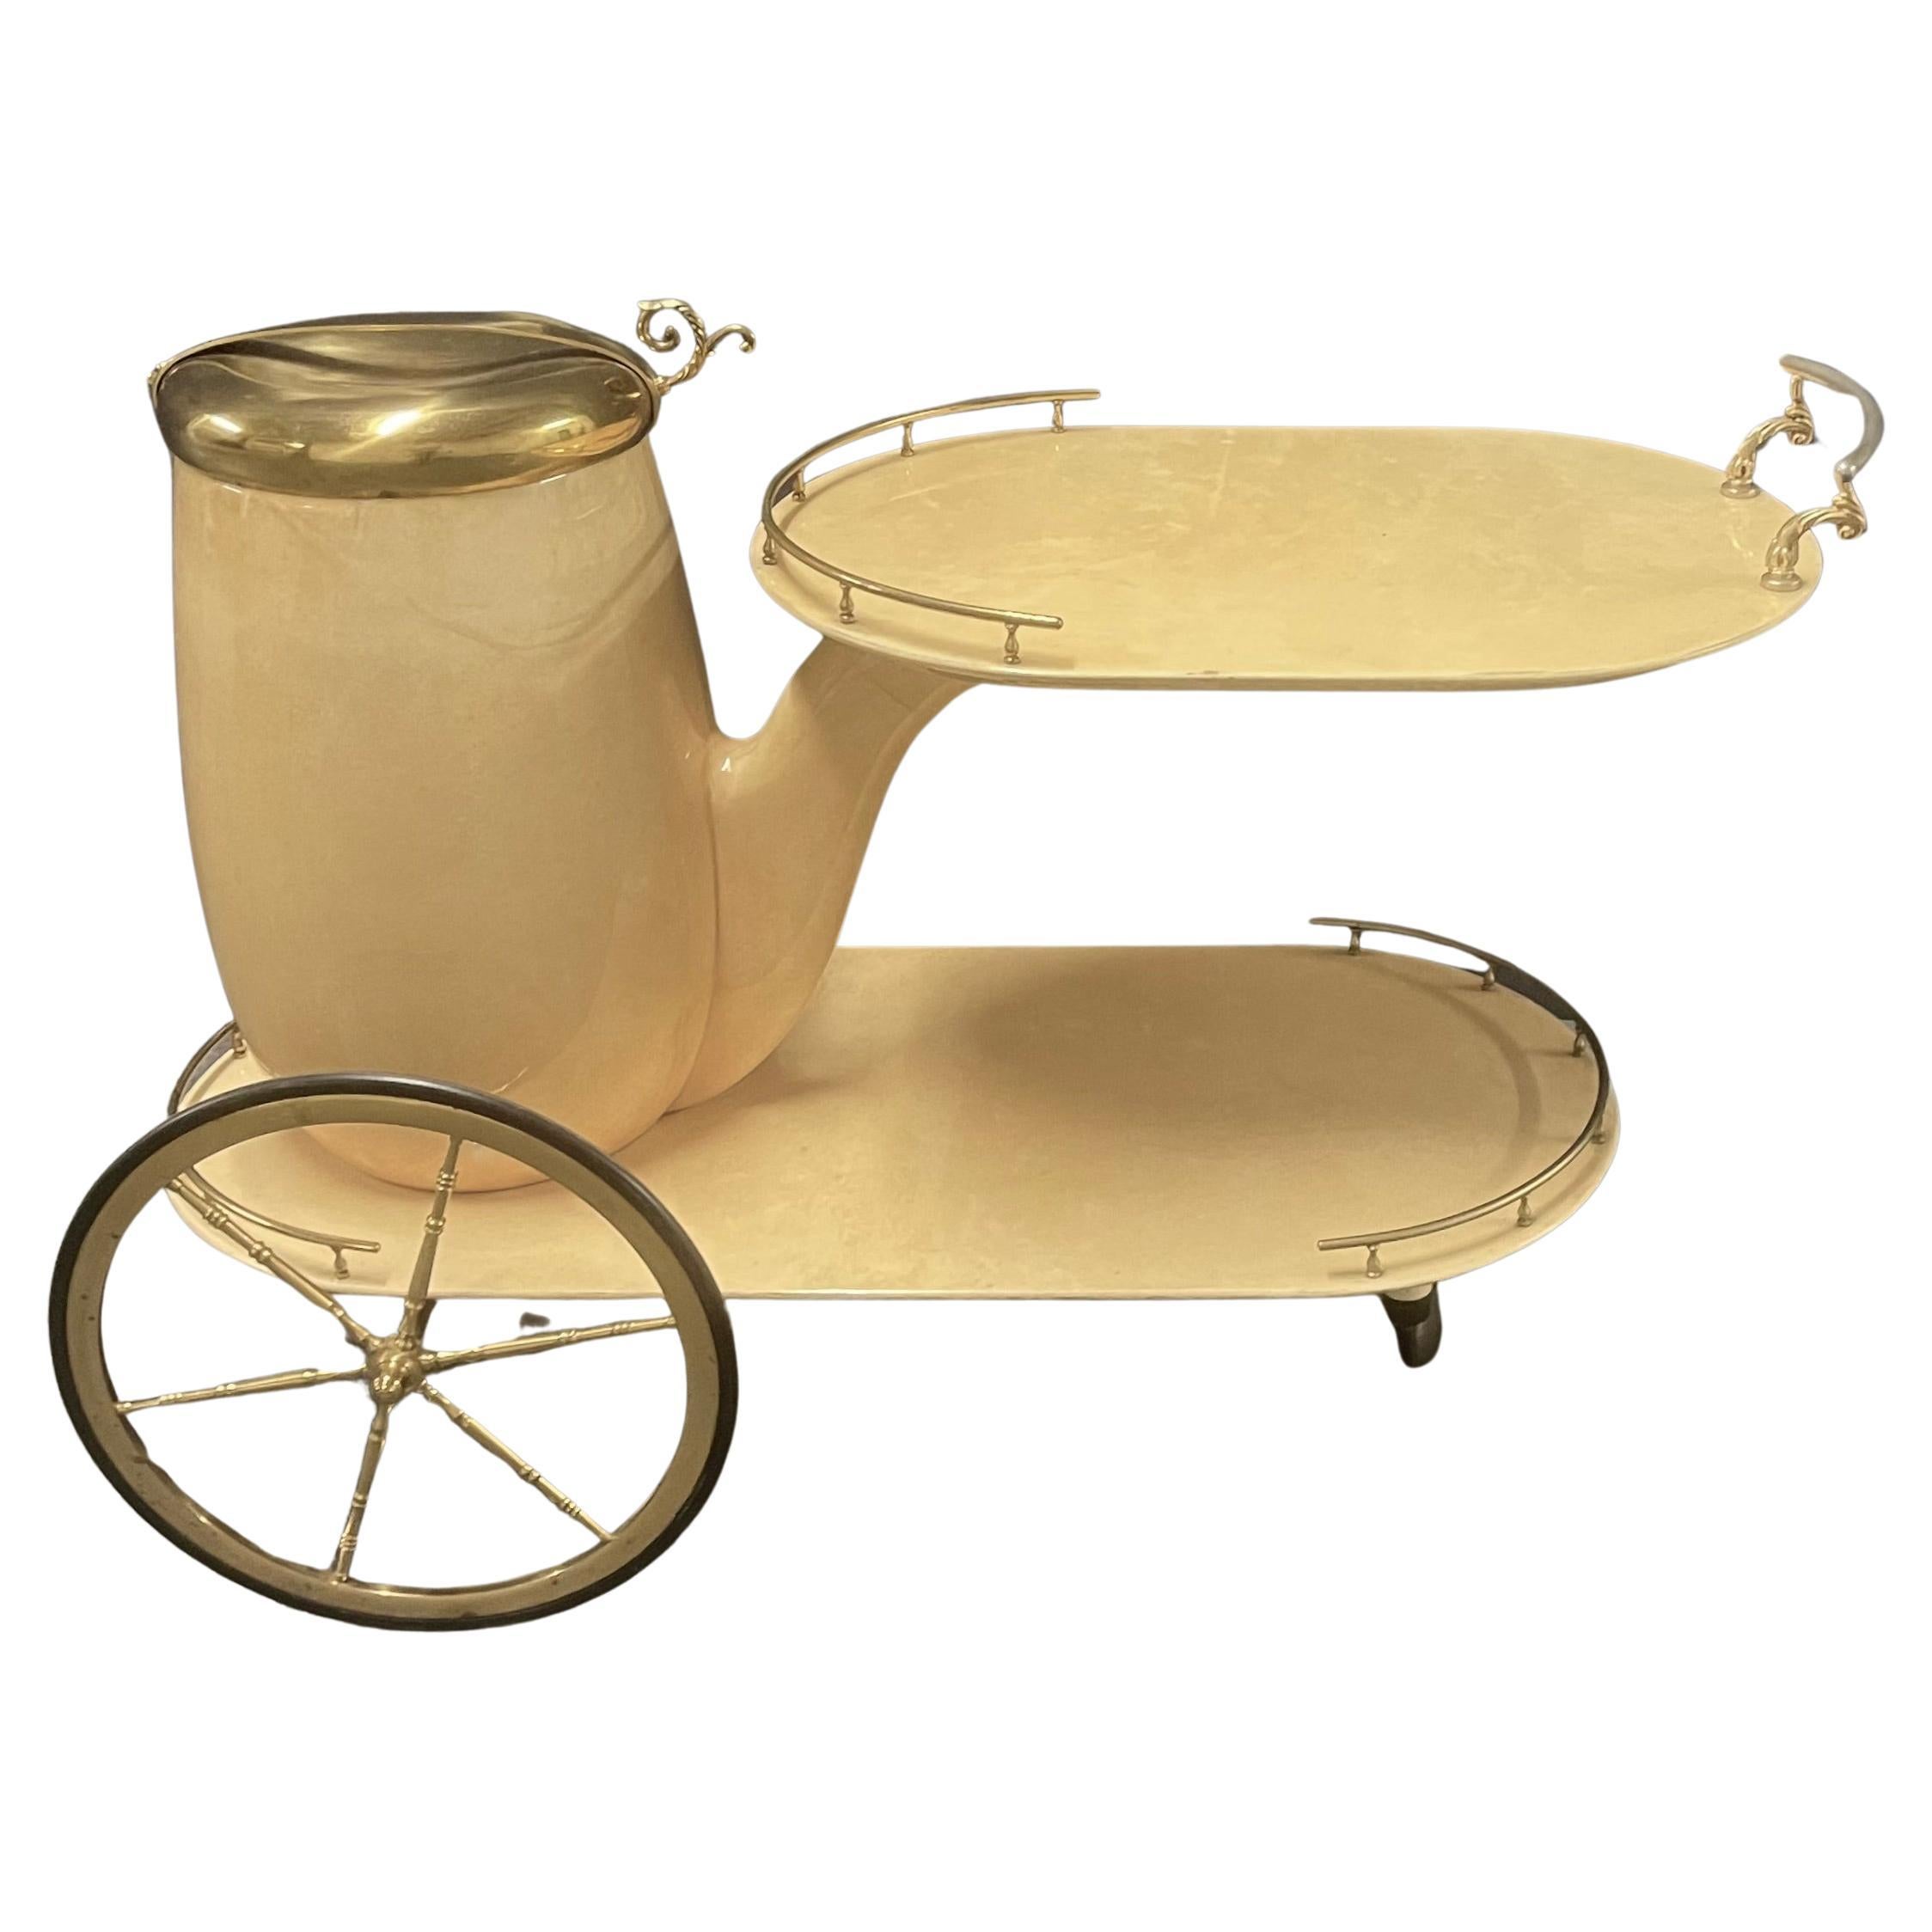 Iconic Aldo Tura Champagne cooler bar cart For Sale